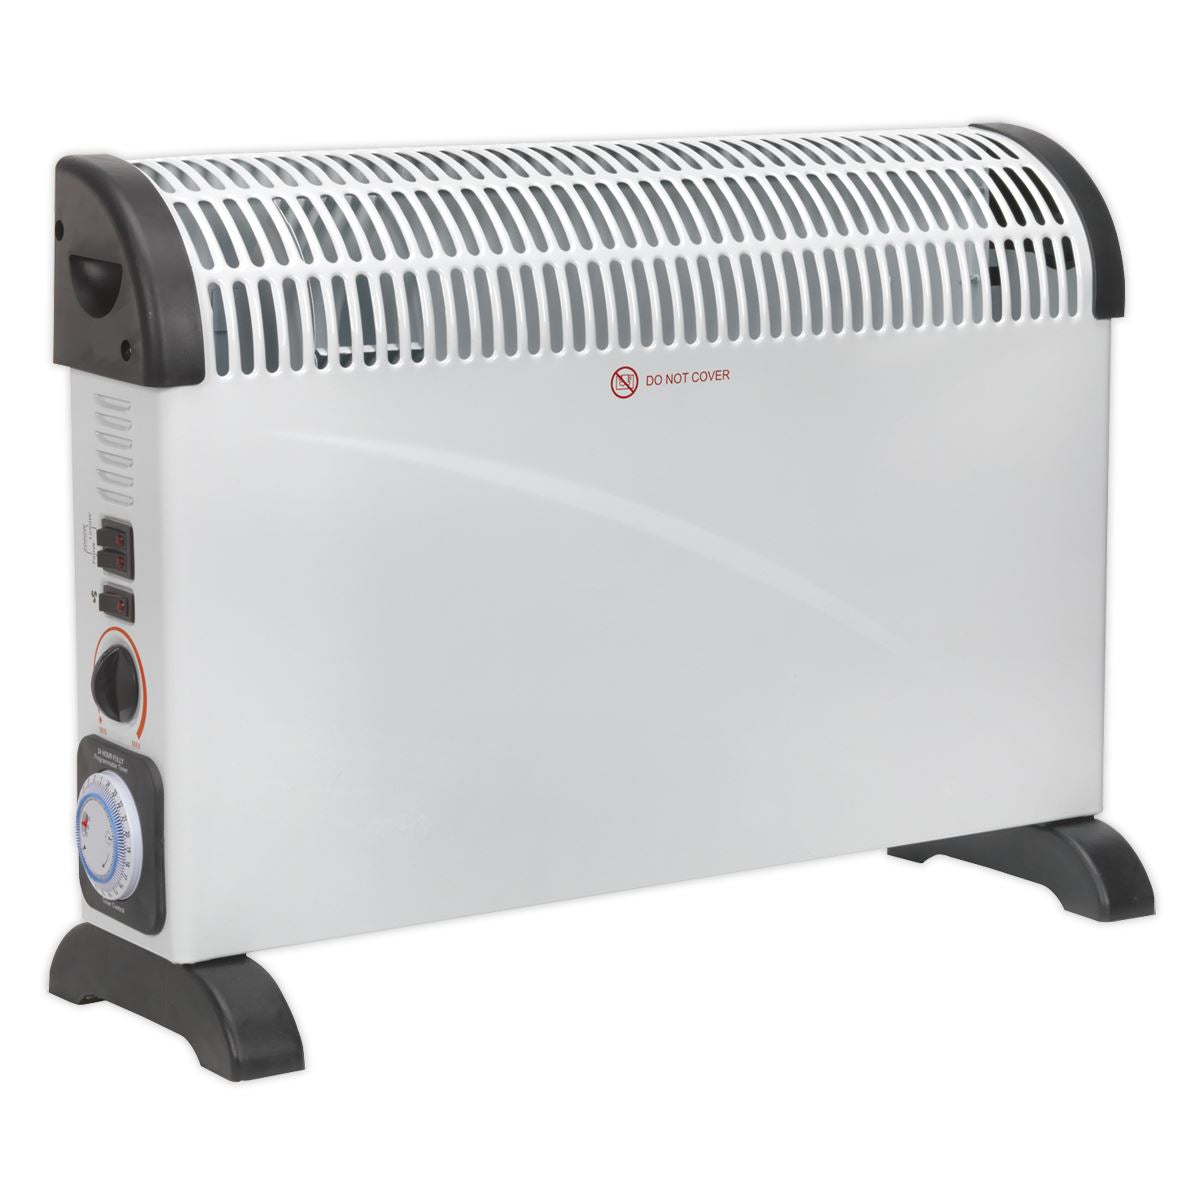 Sealey Convector Heater 2000W/230V with Turbo, Timer & Thermostat